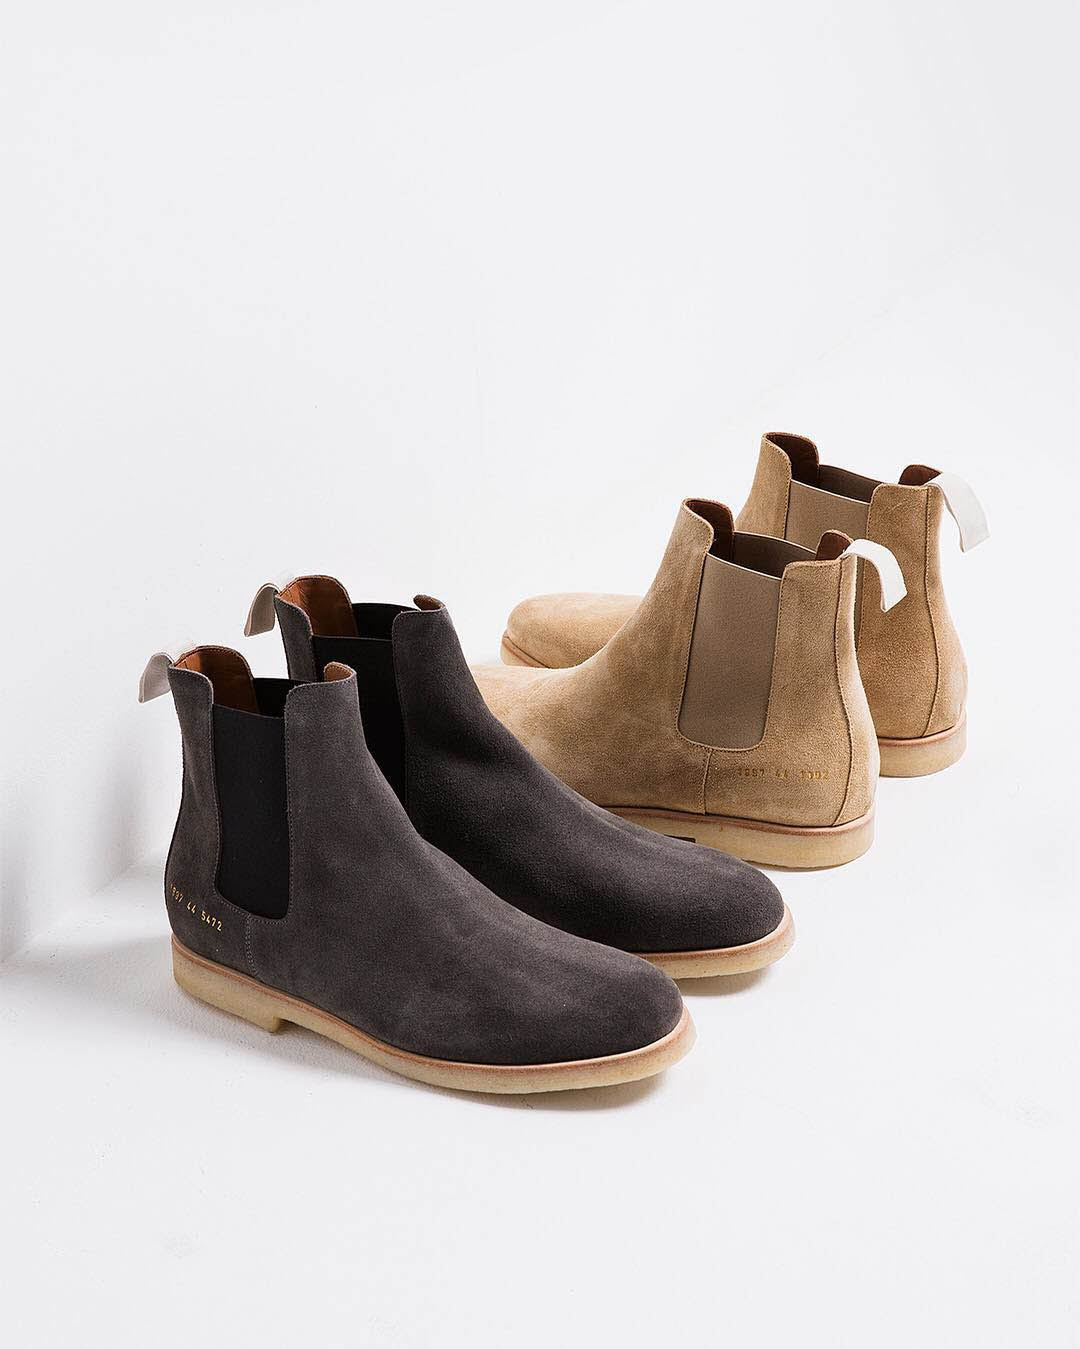 Suede Chelsea Boots. #commonprojects